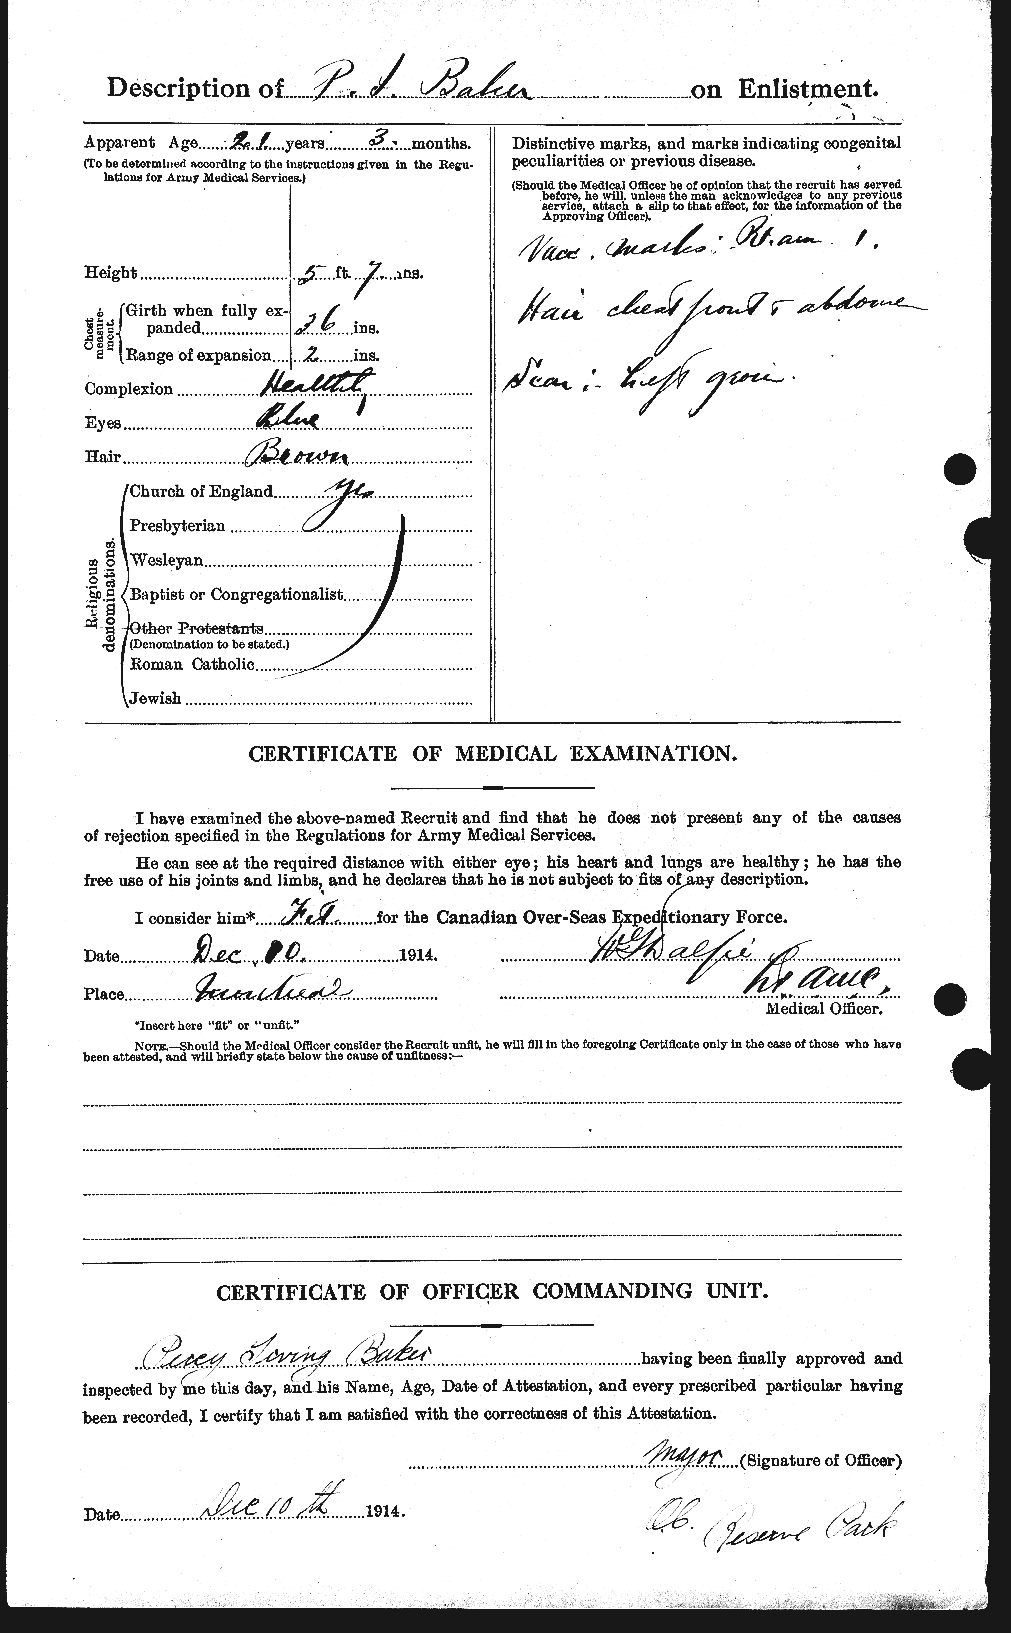 Personnel Records of the First World War - CEF 222261b